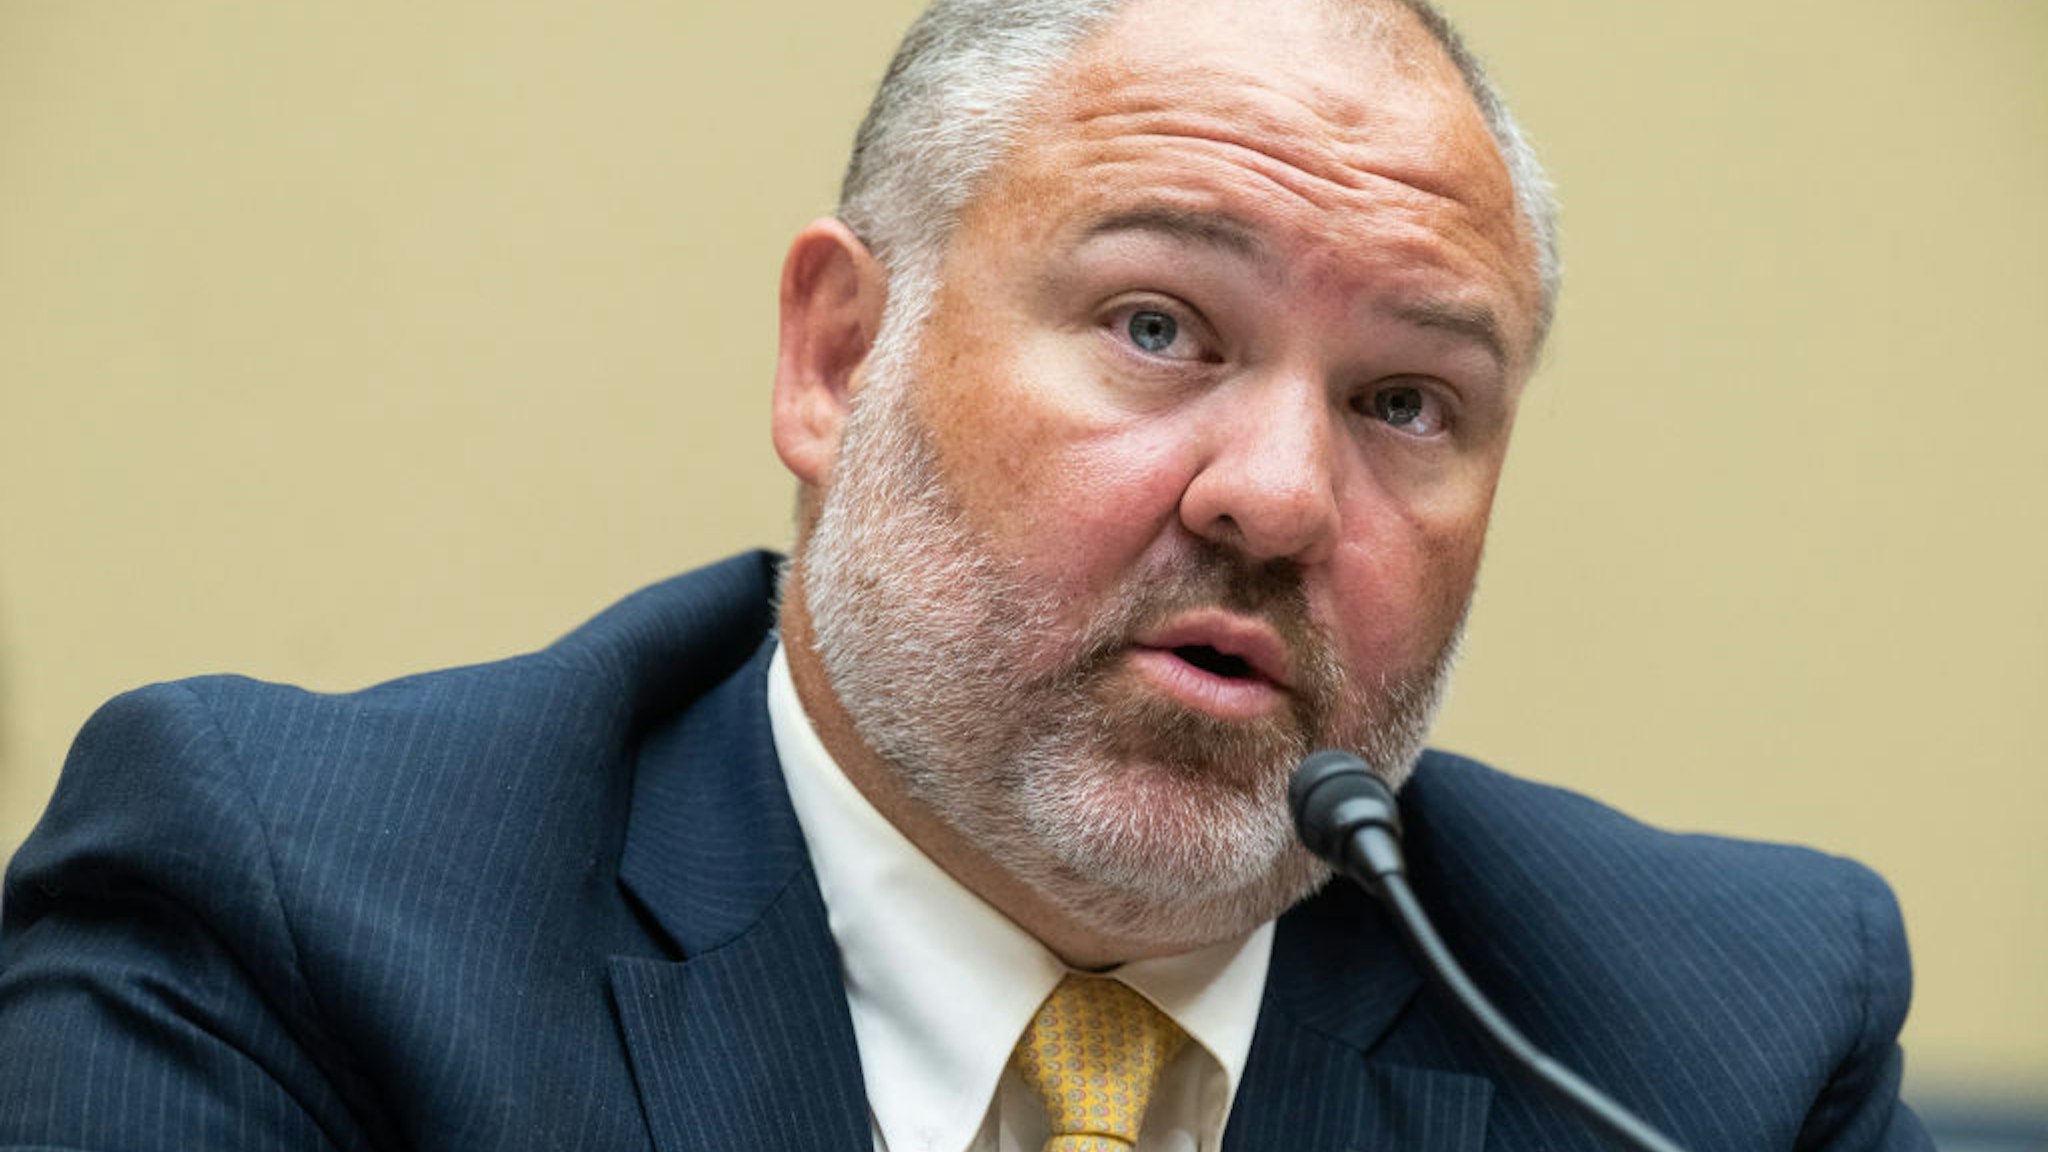 Gary Shapley, IRS supervisory special agent, testifies during the House Oversight and Accountability Committee "Hearing with IRS Whistleblowers About the Biden Criminal Investigation," in Rayburn Building on Wednesday, July 19, 2023